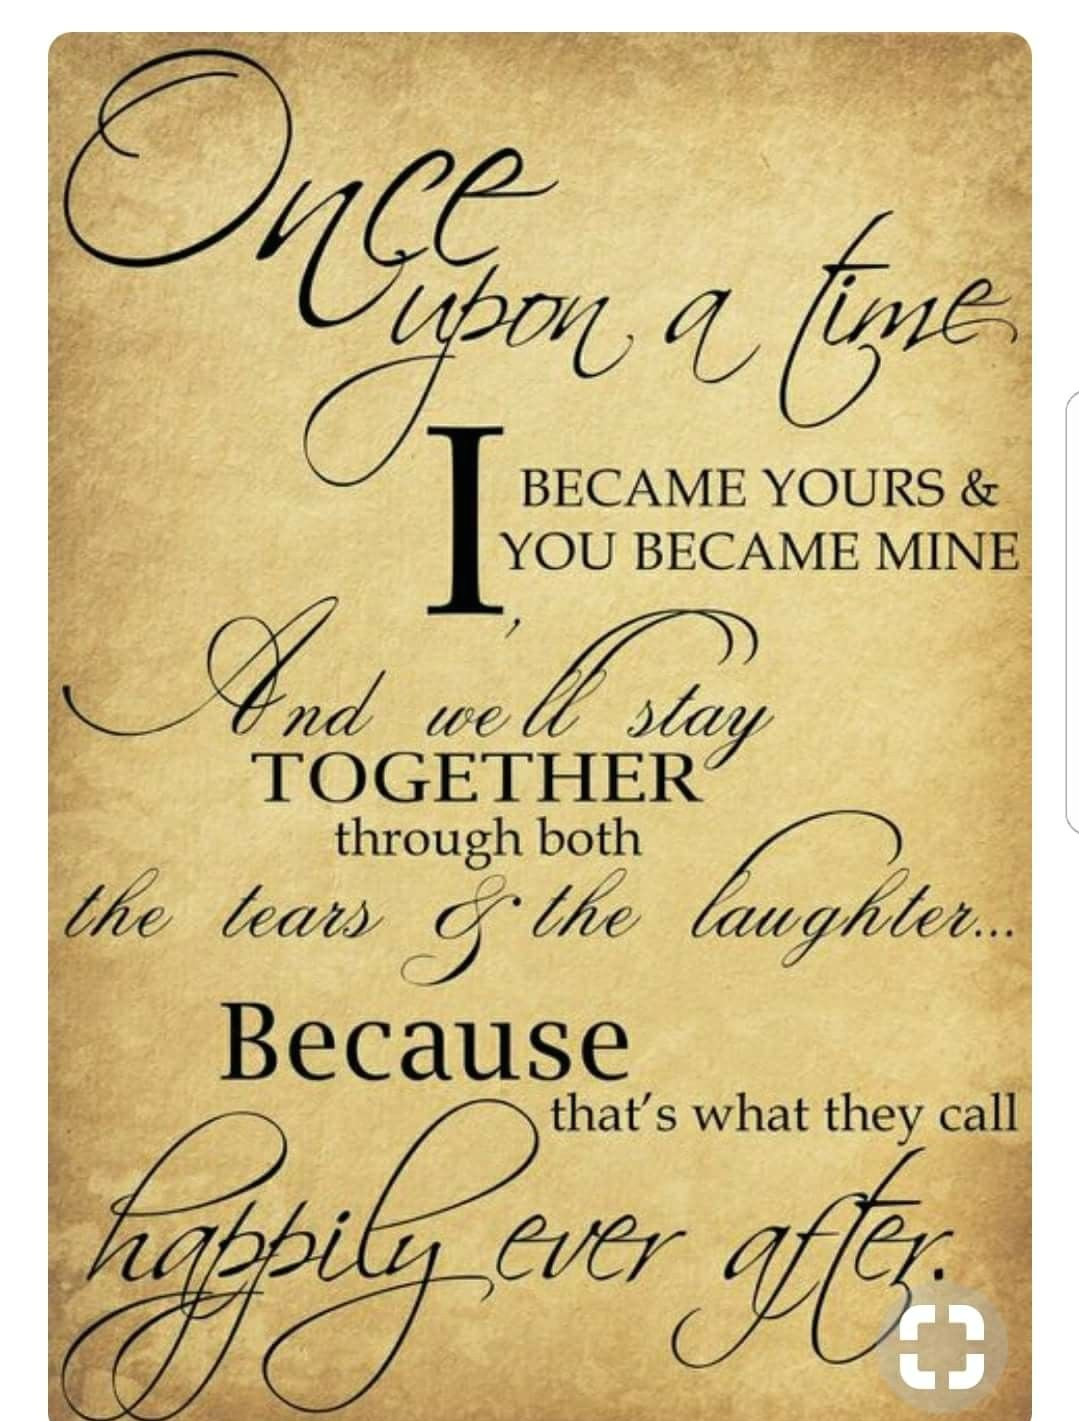 amazing quotes you can include in your wedding invitation card